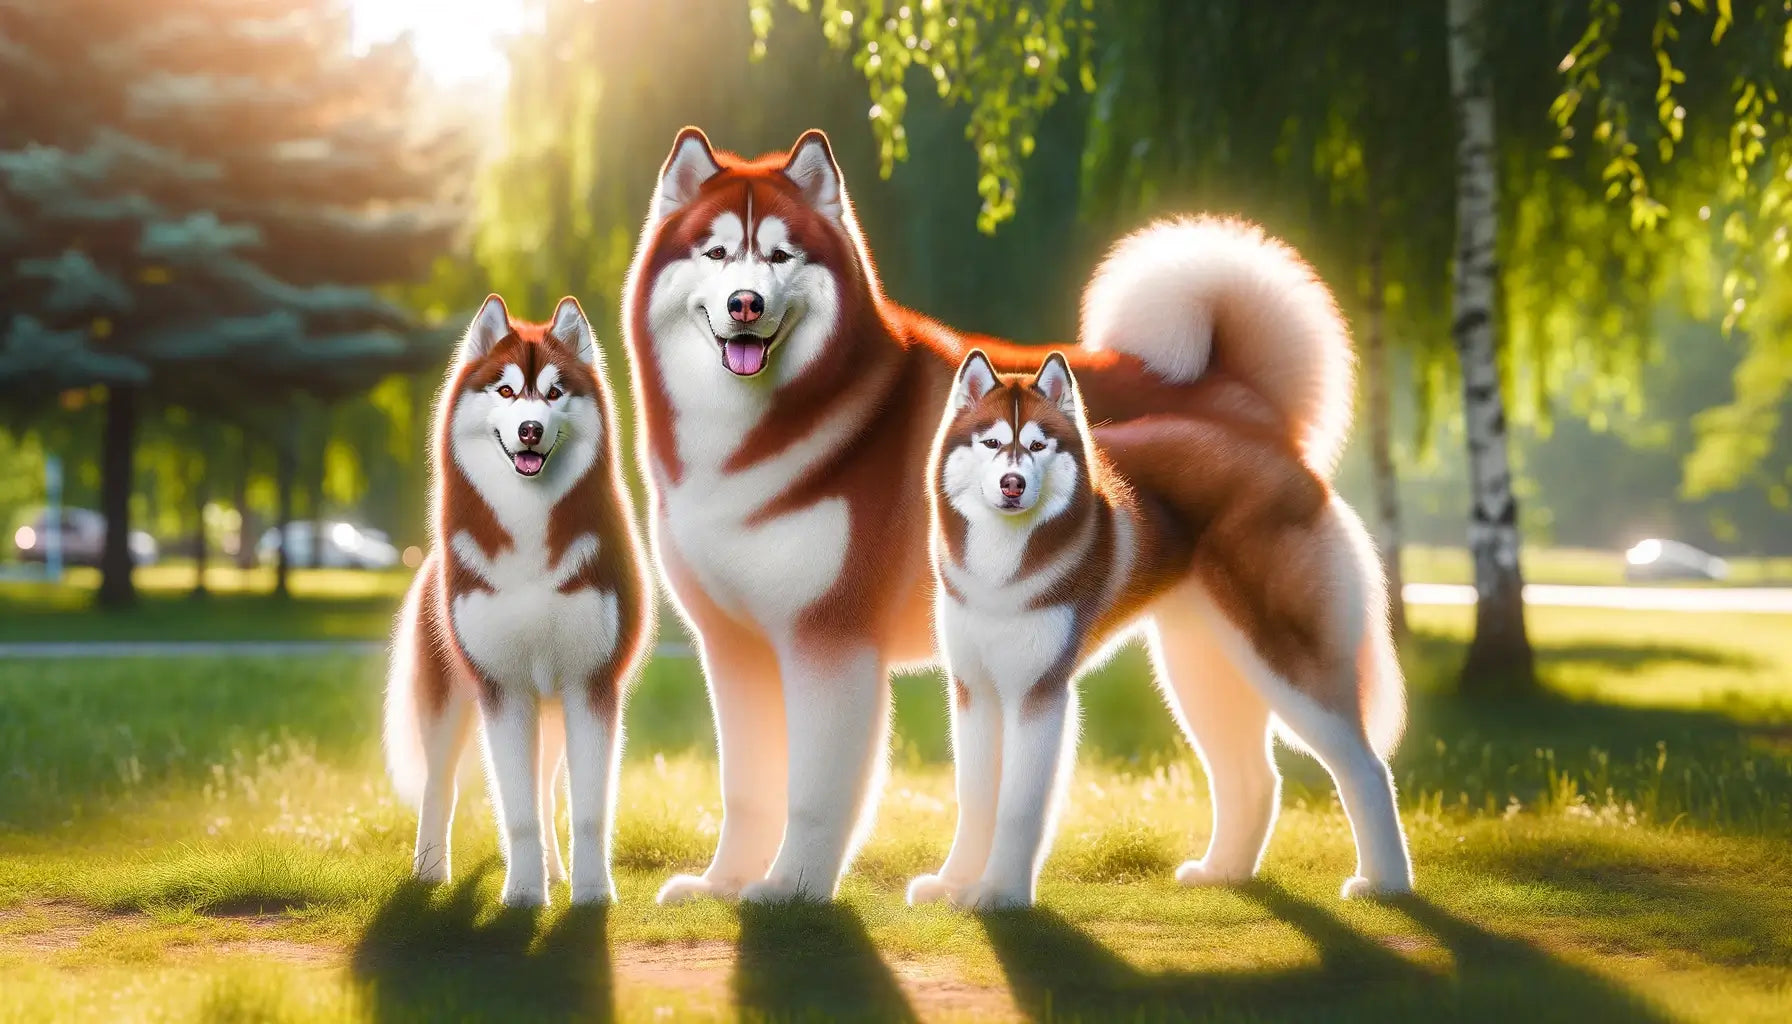 Image showing a male and female Red Husky standing side by side, allowing for a clear comparison of their physical attributes.